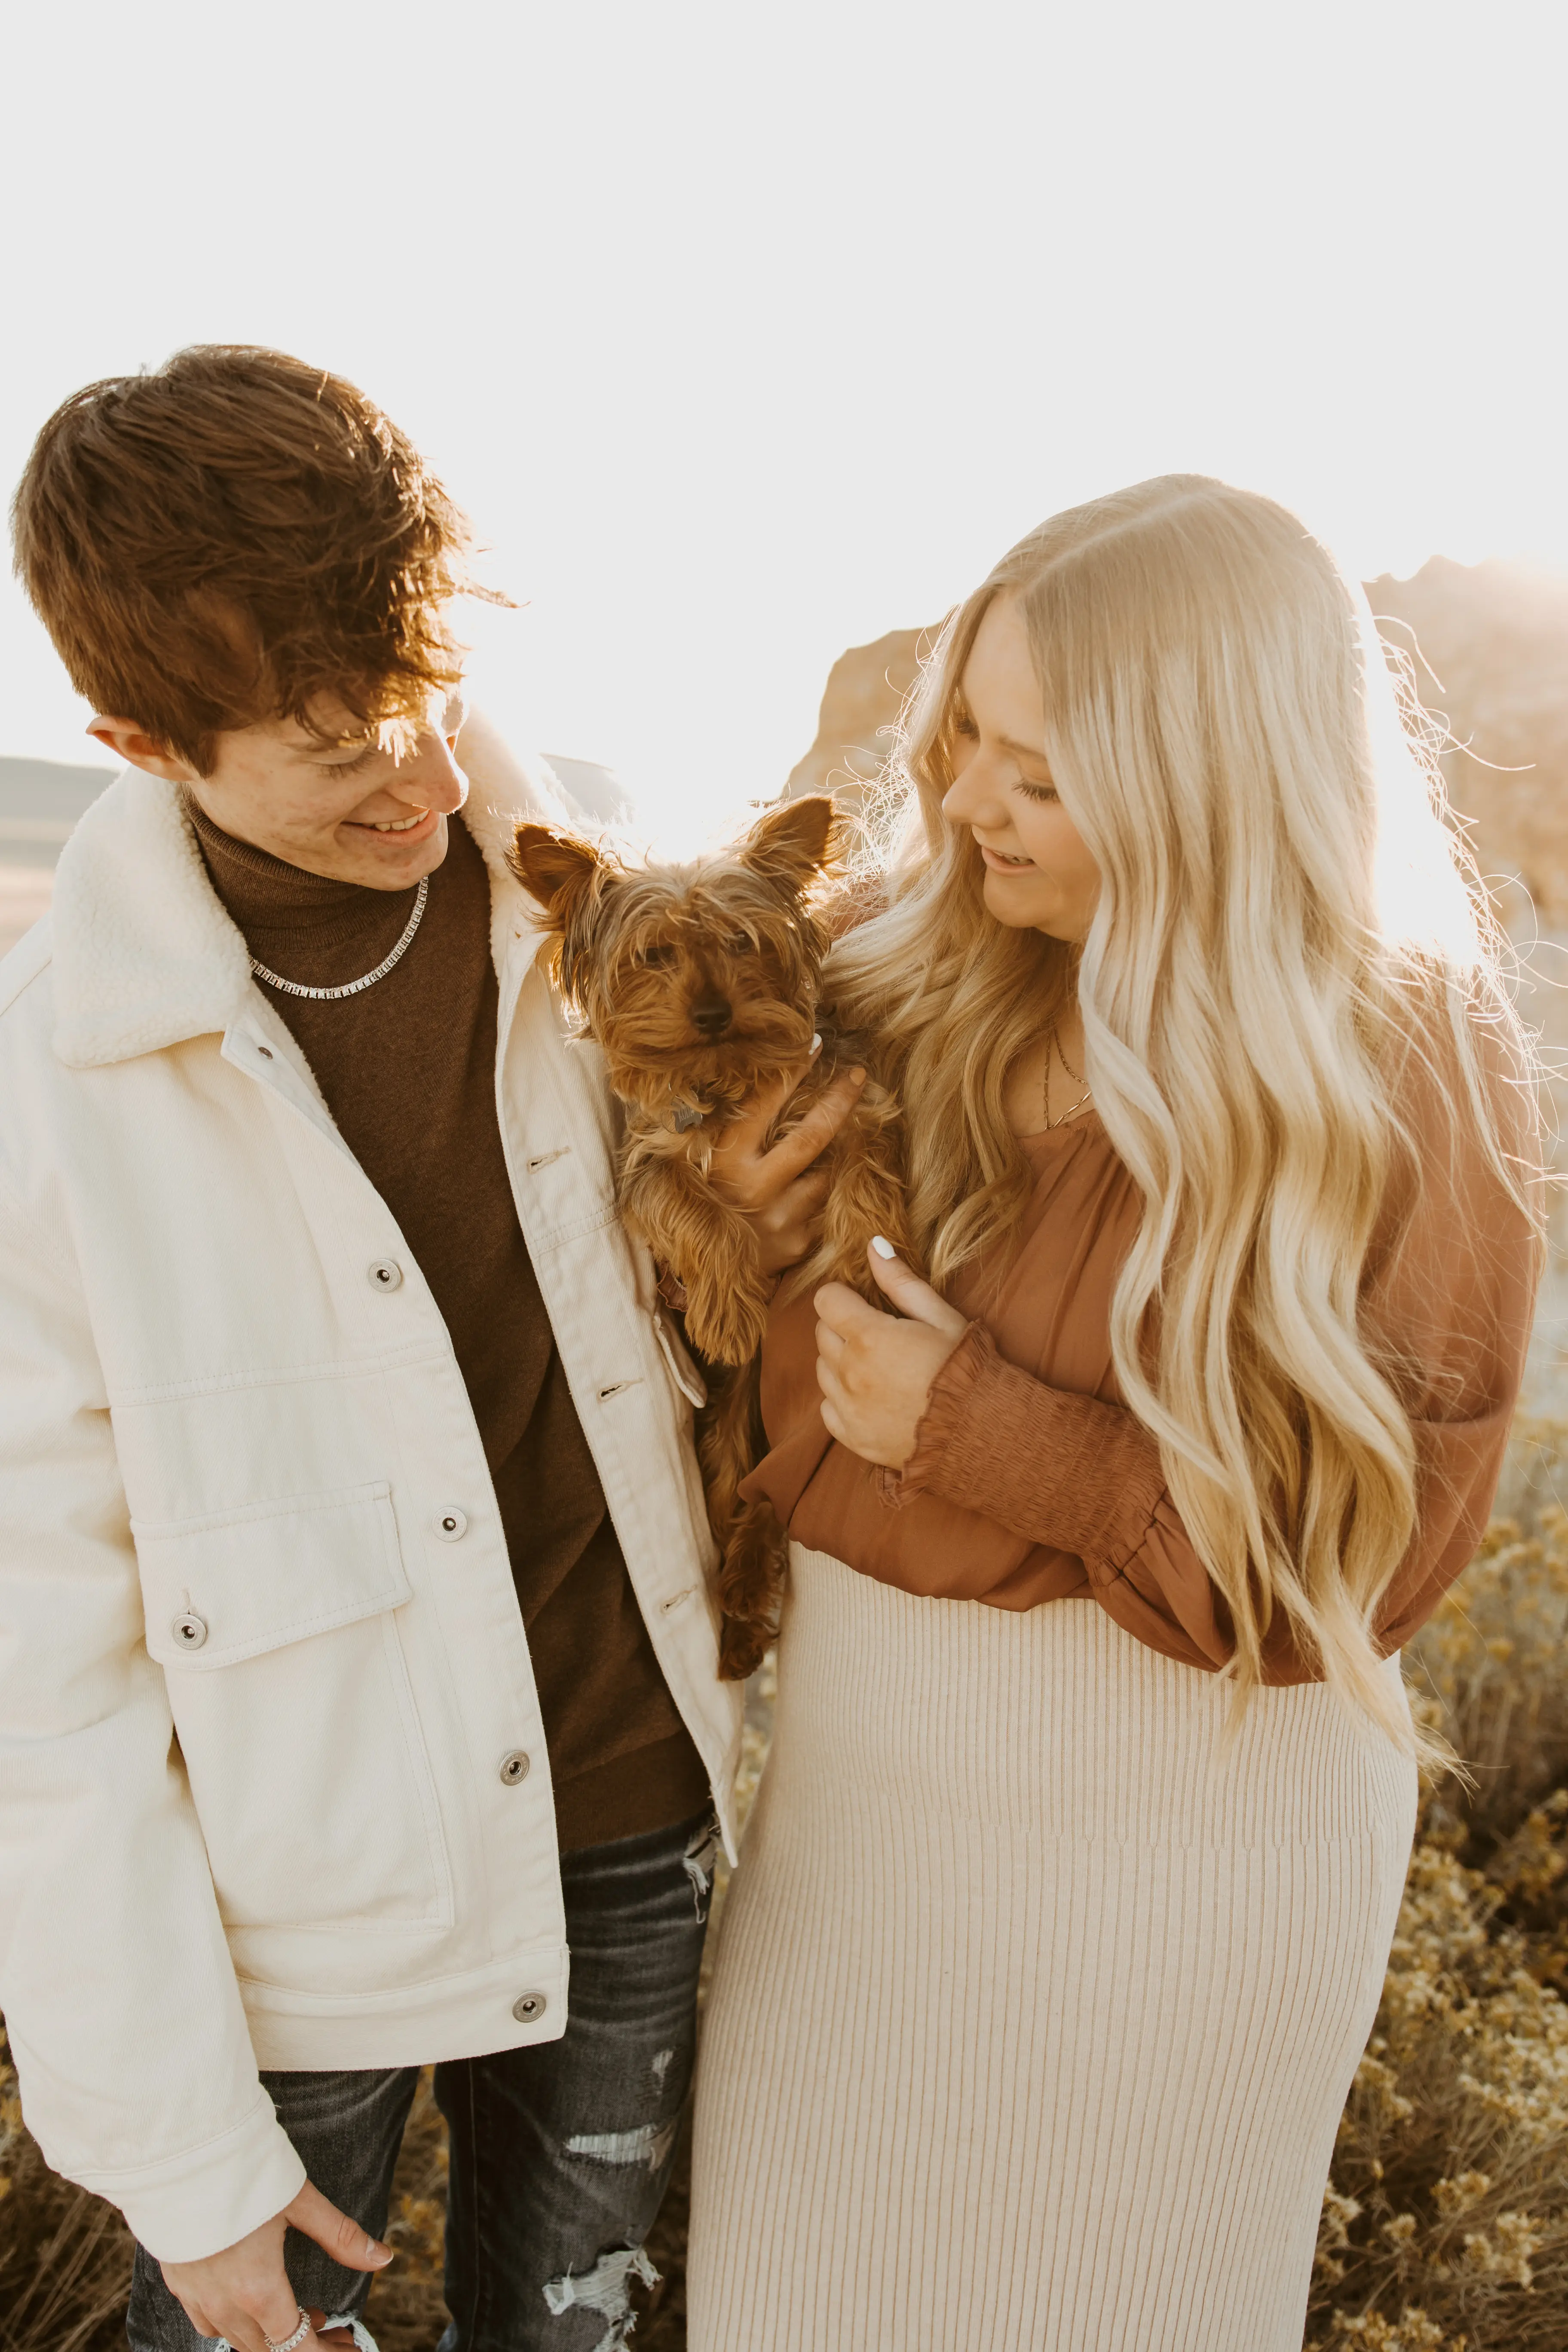 Brynelle, her boyfriend (Tate), and their dog (Koda), all posing together for a family photo, with Tate and Brynelle laughing at Koda